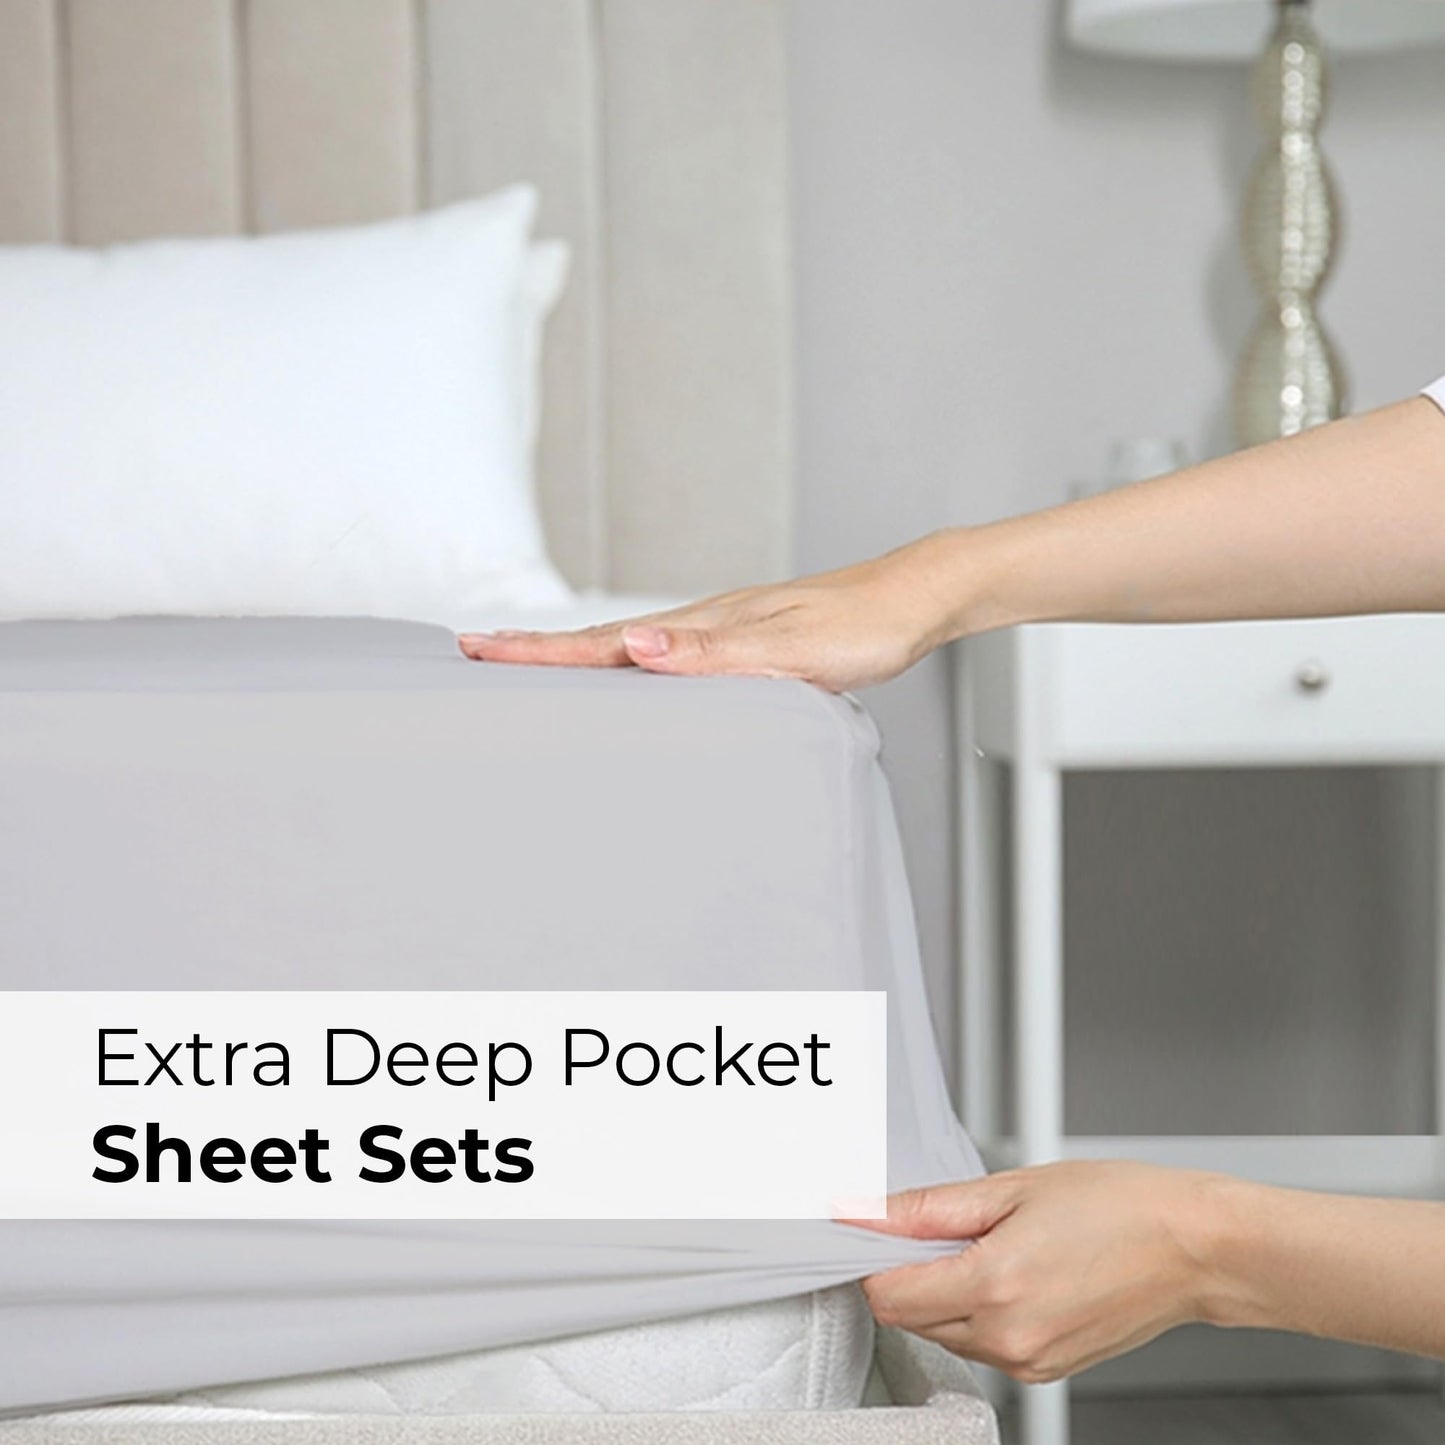 Extra Deep King Sheet Set - 6 Piece Breathable & Cooling Sheets - Hotel Luxury Bed Sheets Set - Easy Fit - Soft, Wrinkle Free & Comfy Sheets Set - Light Grey Sheet Set w/Extra Deep Pockets